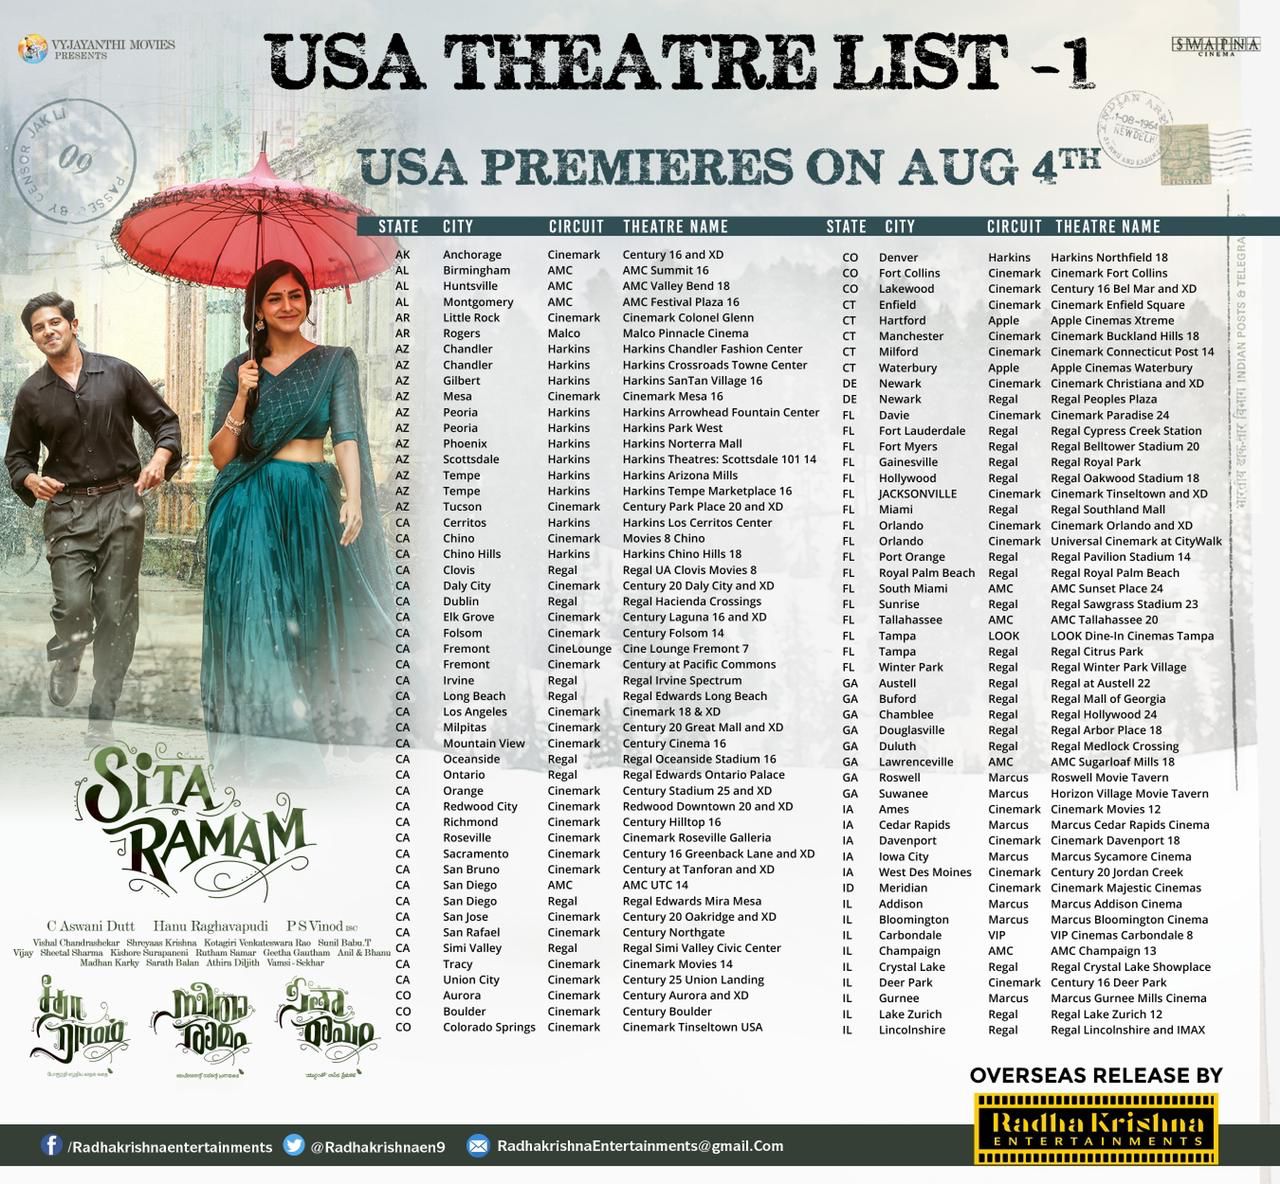 Sita Ramam US premieres planned spectacularly